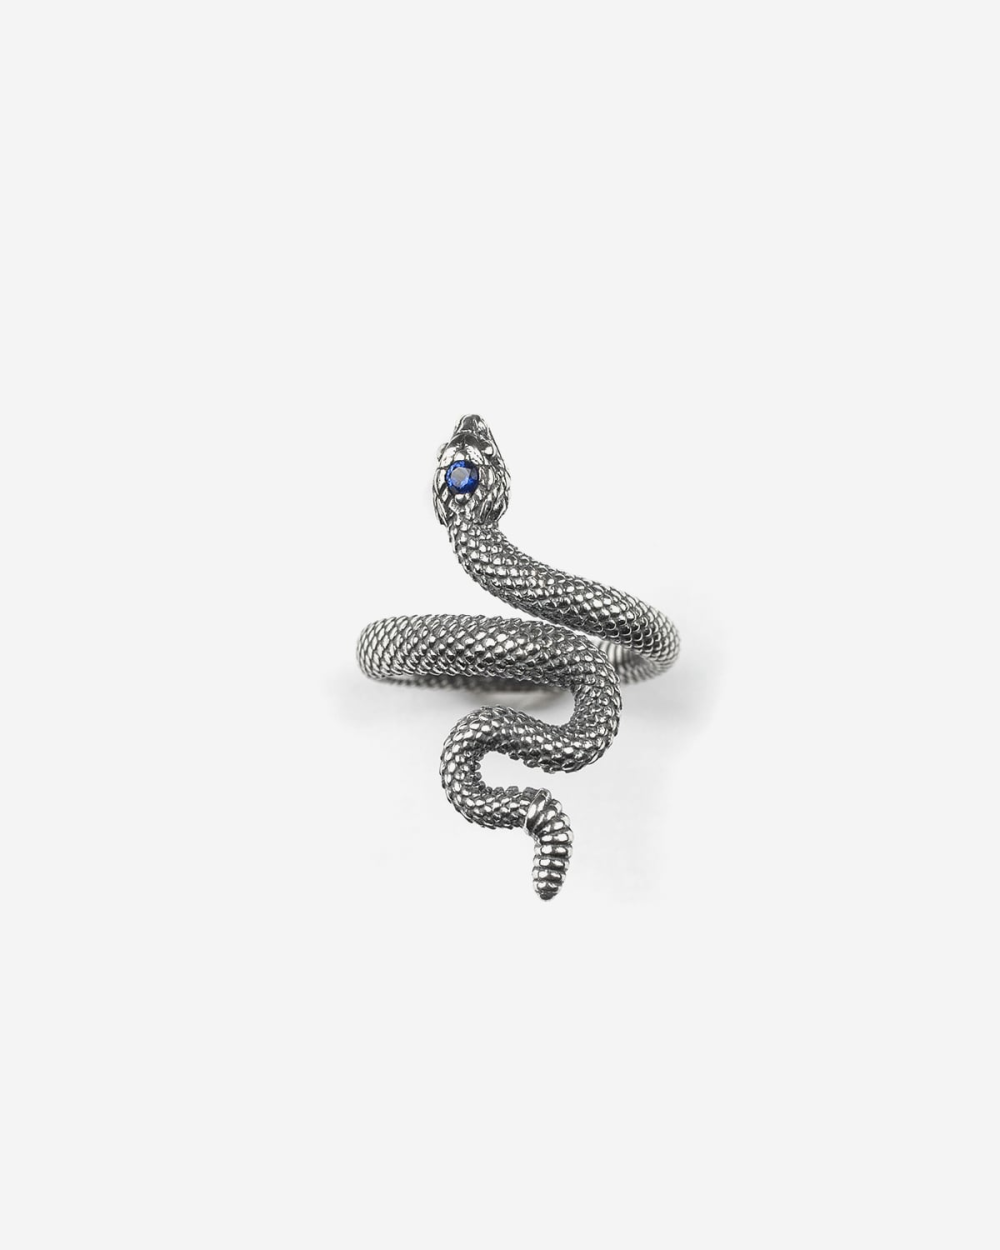 SNAKE RING WITH BLU SPINEL